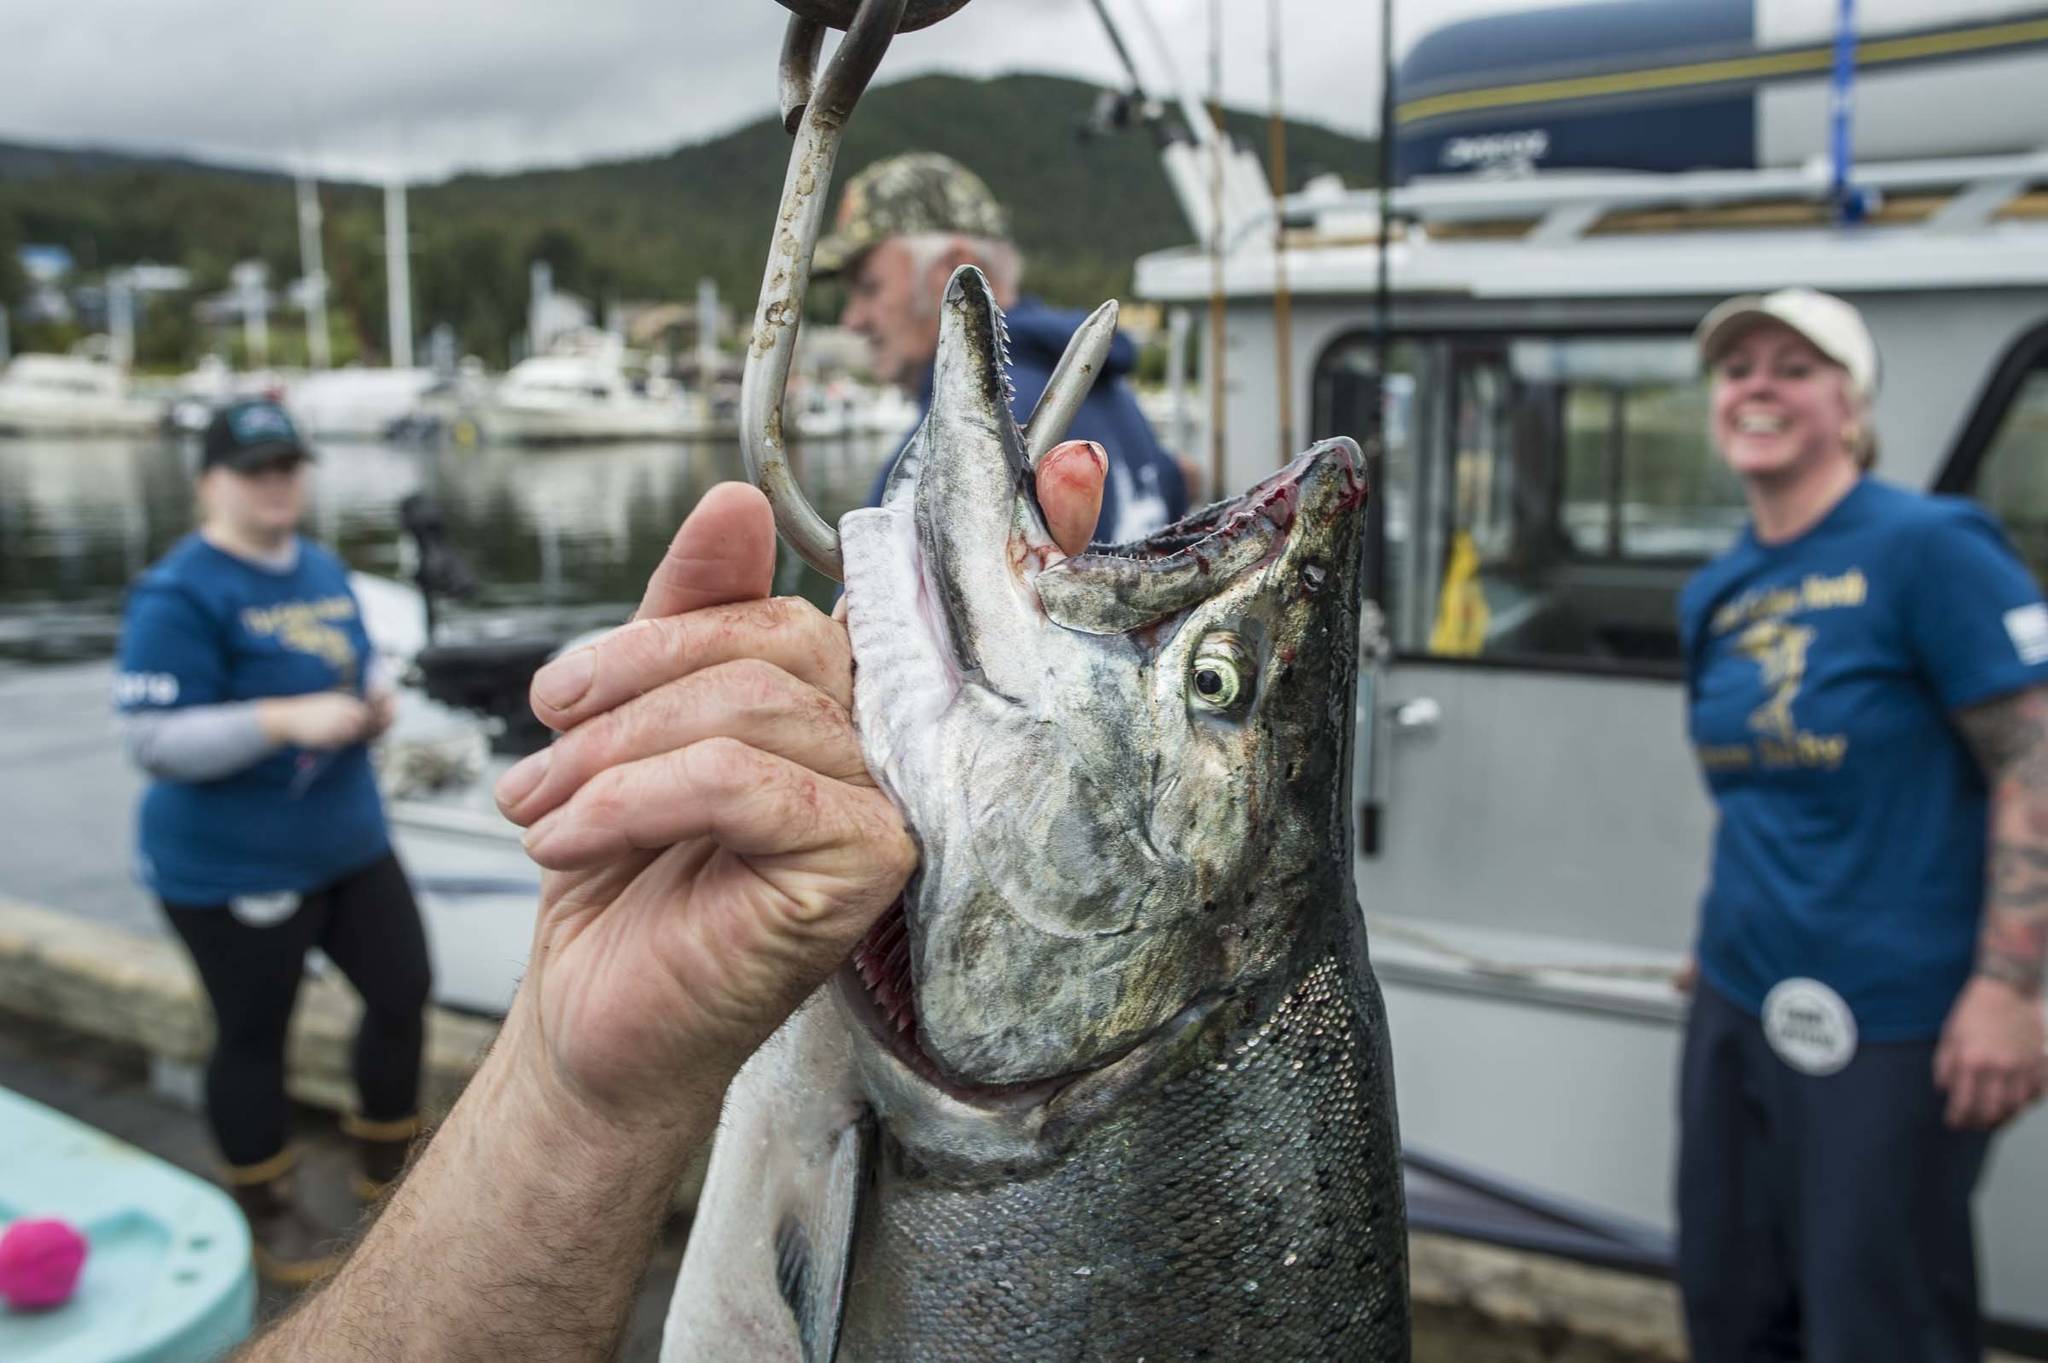 A 20 pound king salmon is lifted of the scale at the Golden North Salmon Derby’s station at the Don D. Statter Memorial Boat Harbor on Saturday, Aug. 24, 2019. (Michael Penn | Juneau Empire)